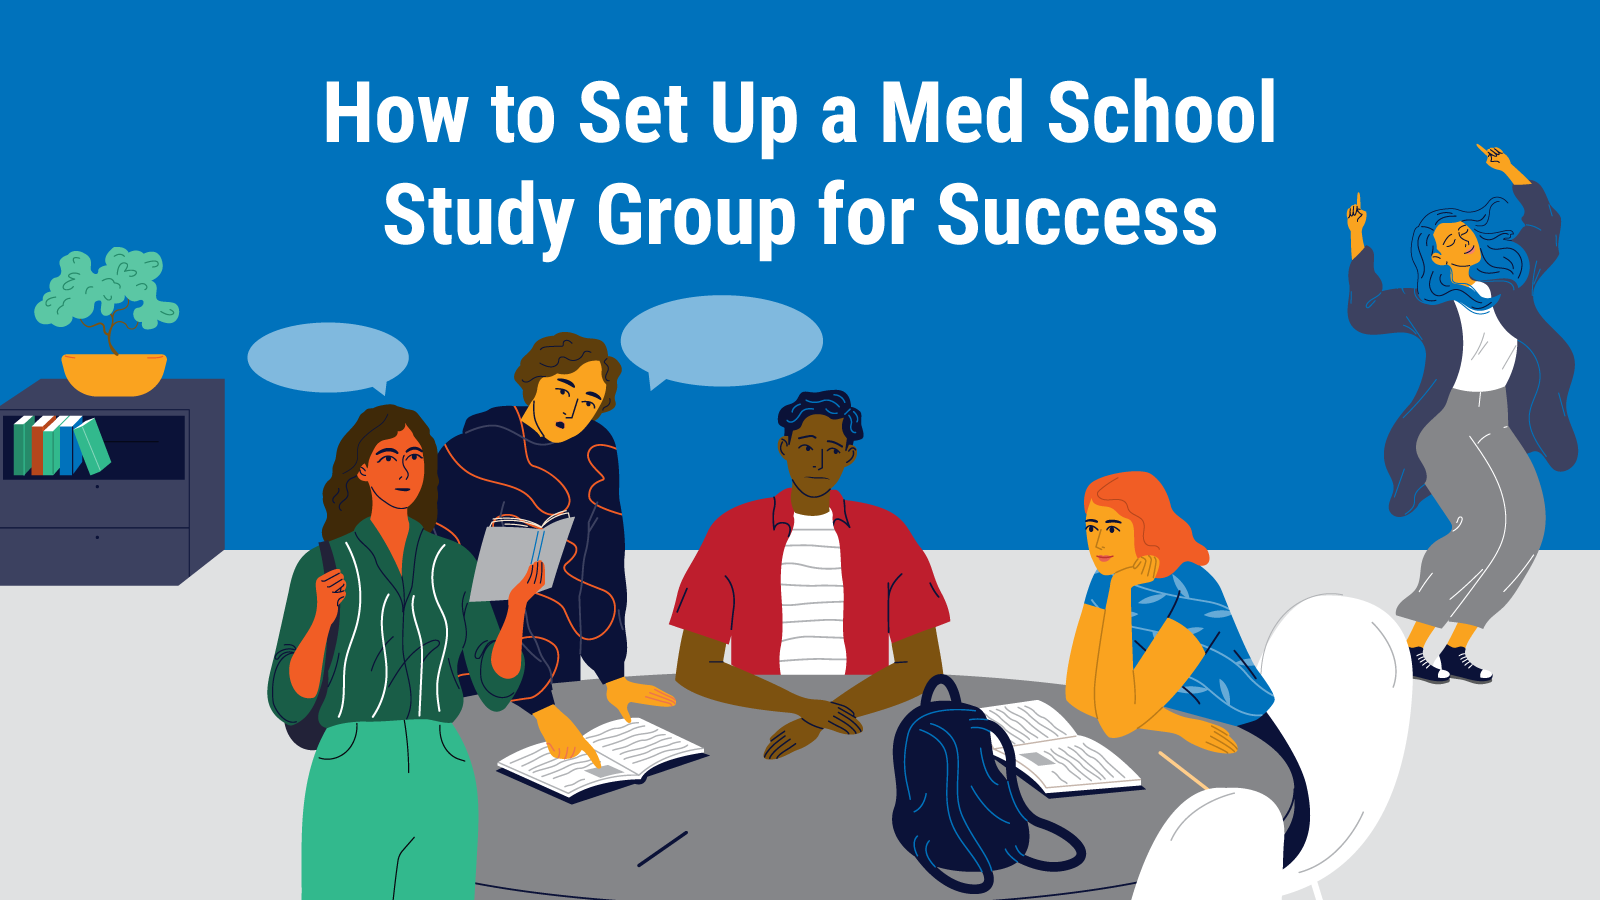 Featured image for “How to Set Up a Med School Study Group for Success”